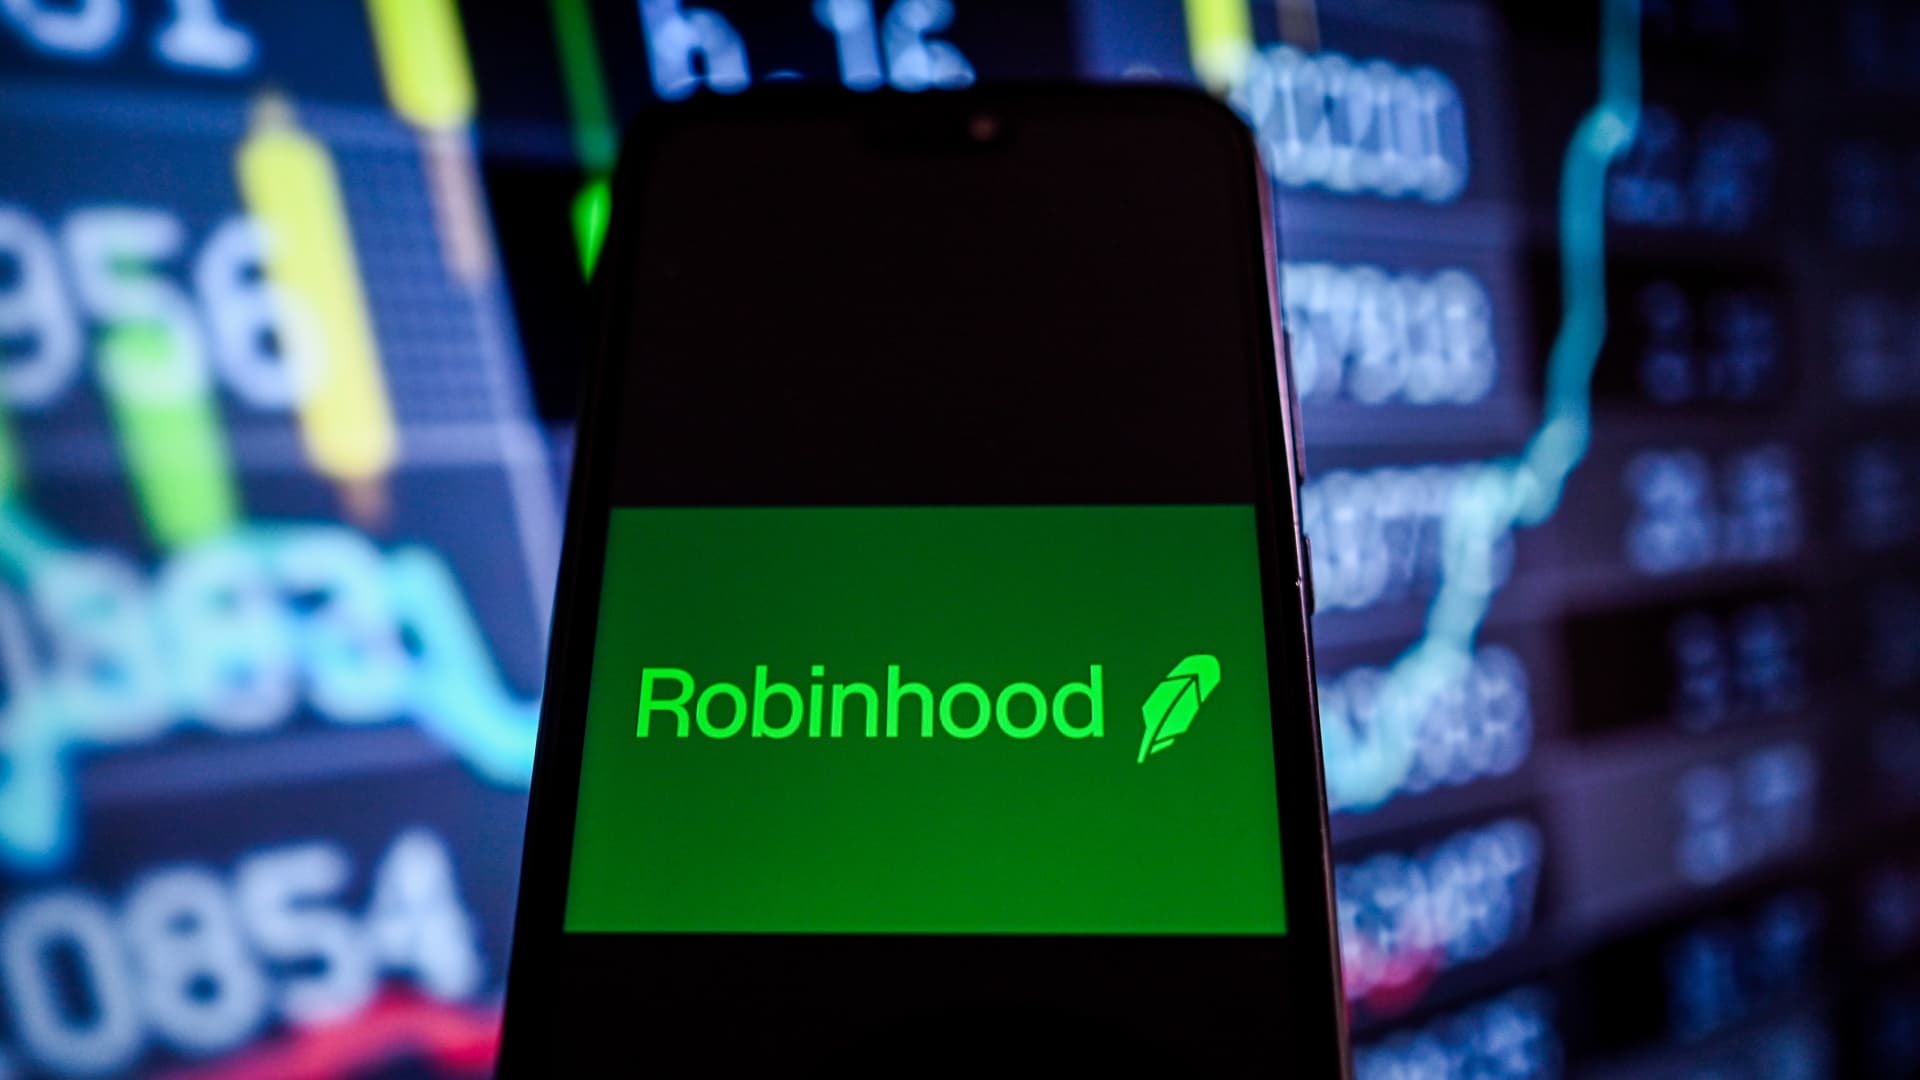 Stocks making the biggest moves after hours: Lyft, Robinhood, Airbnb, MGM Resorts and more